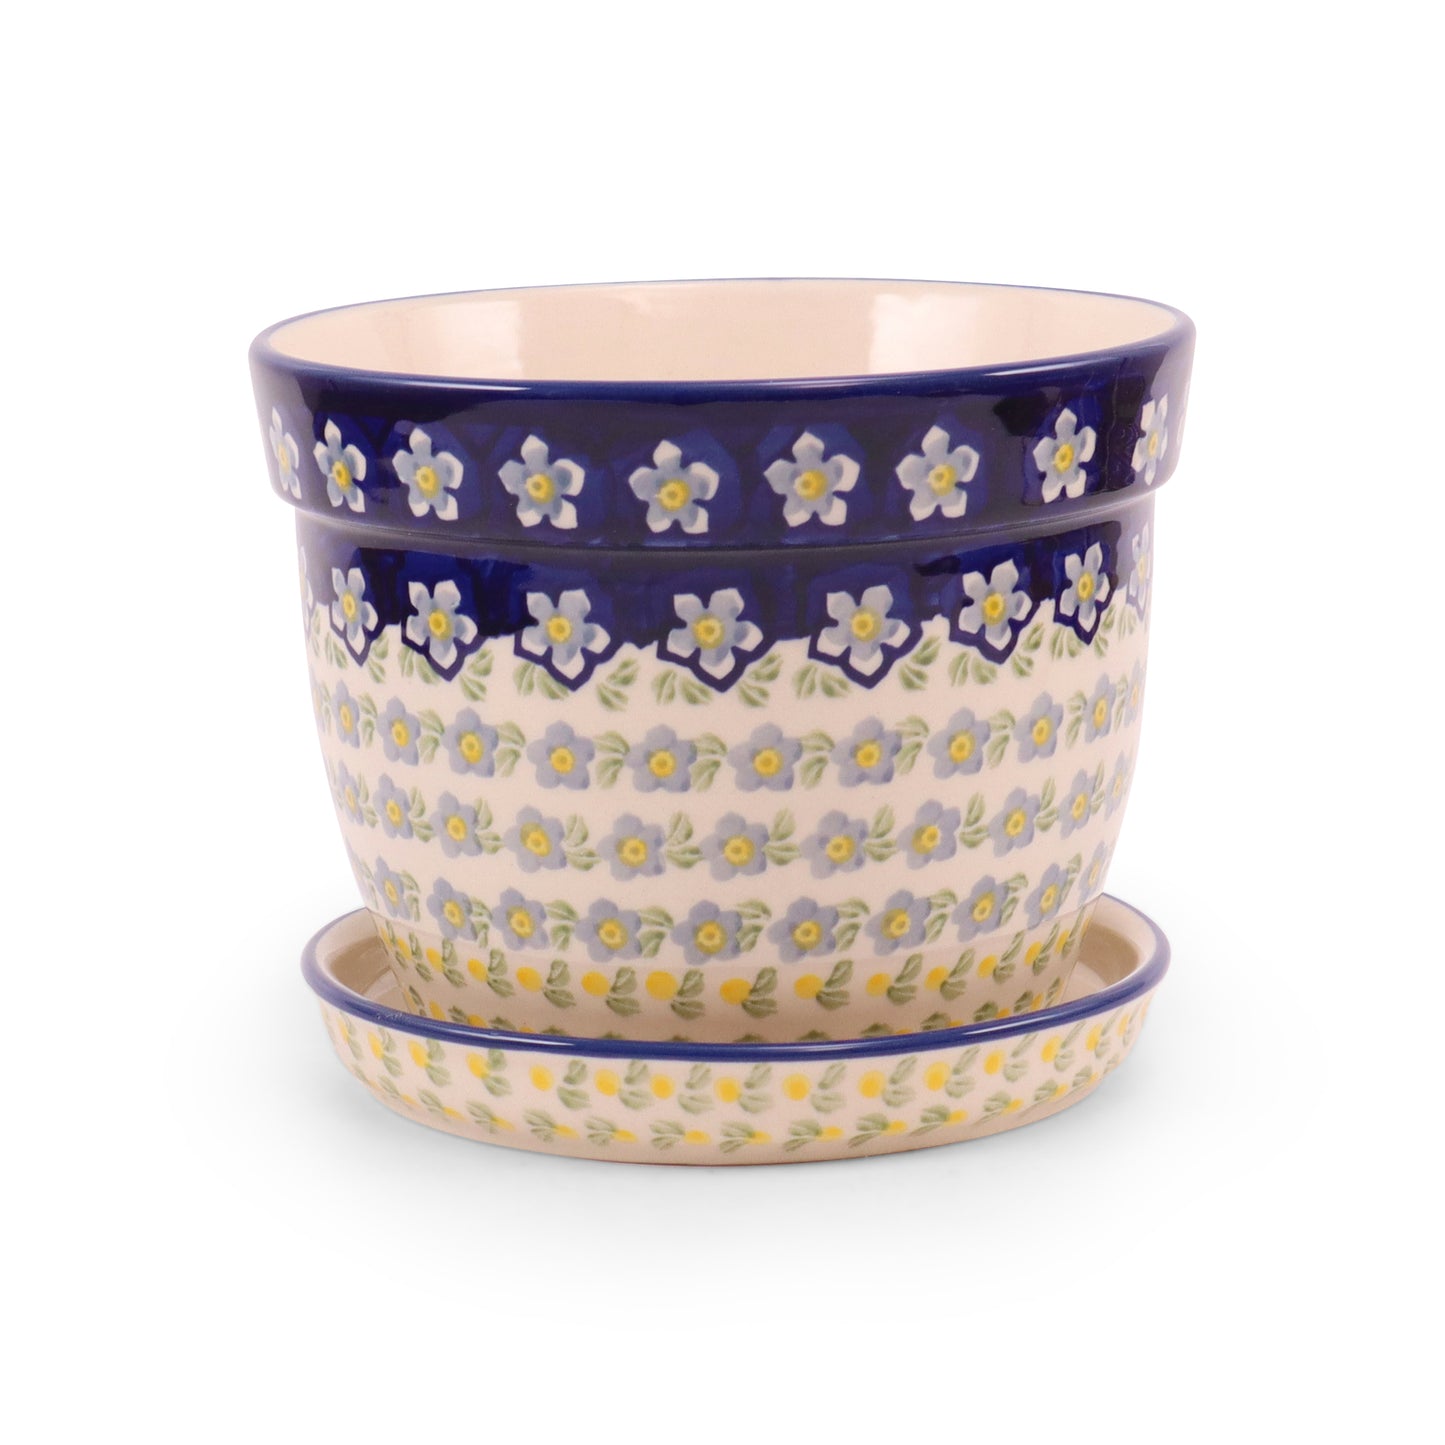 7"x6" Large Flower Pot and Tray. Pattern: Forget Me Not